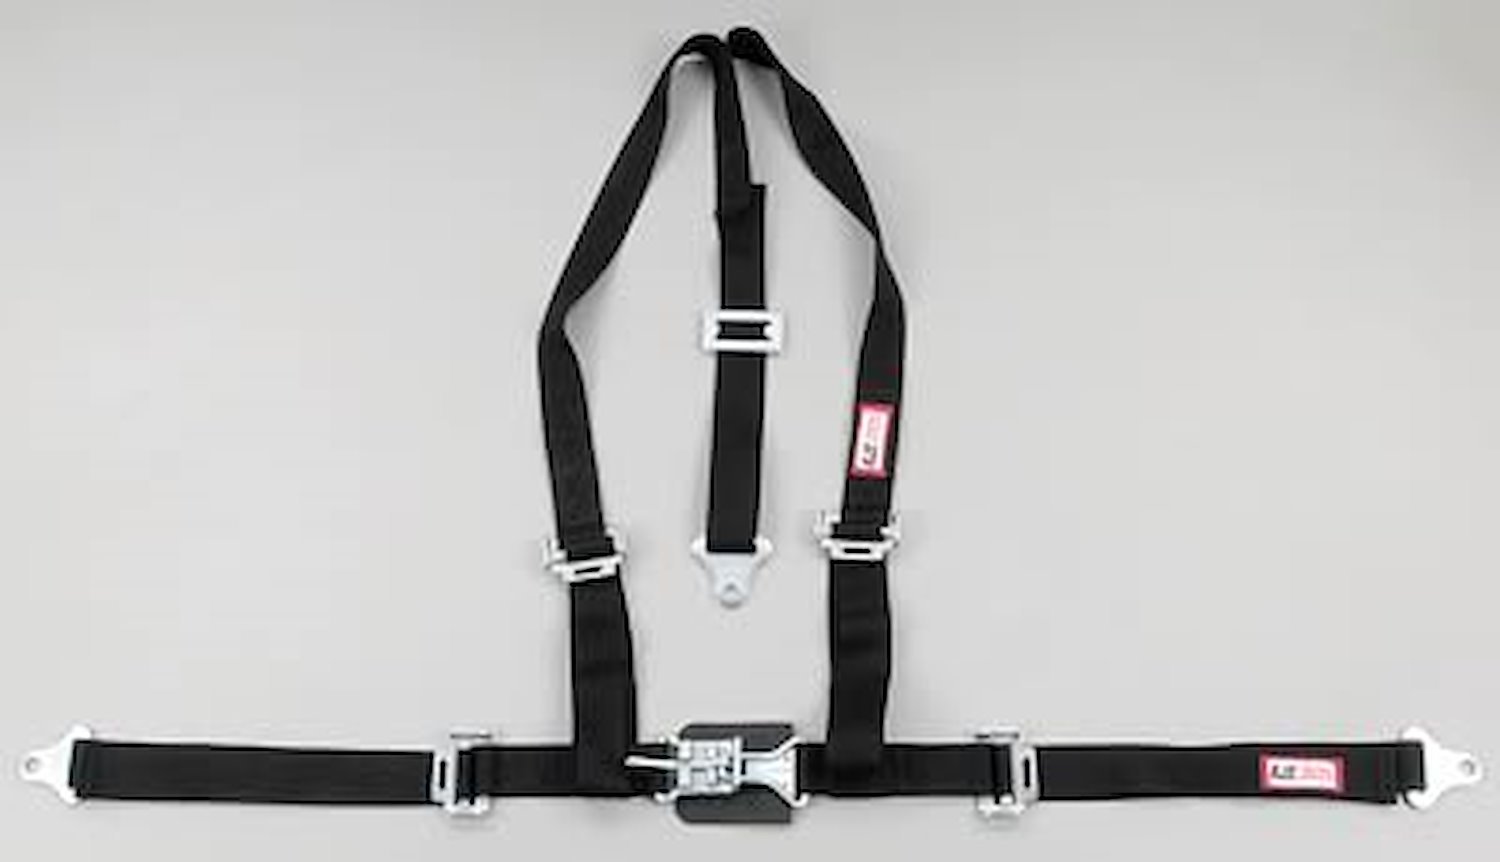 NON-SFI L&L HARNESS 2 PULL UP Lap Belt SNAP SEWN IN 2 S.H. Y FLOOR Mount WRAP/BOLT HOT PINK